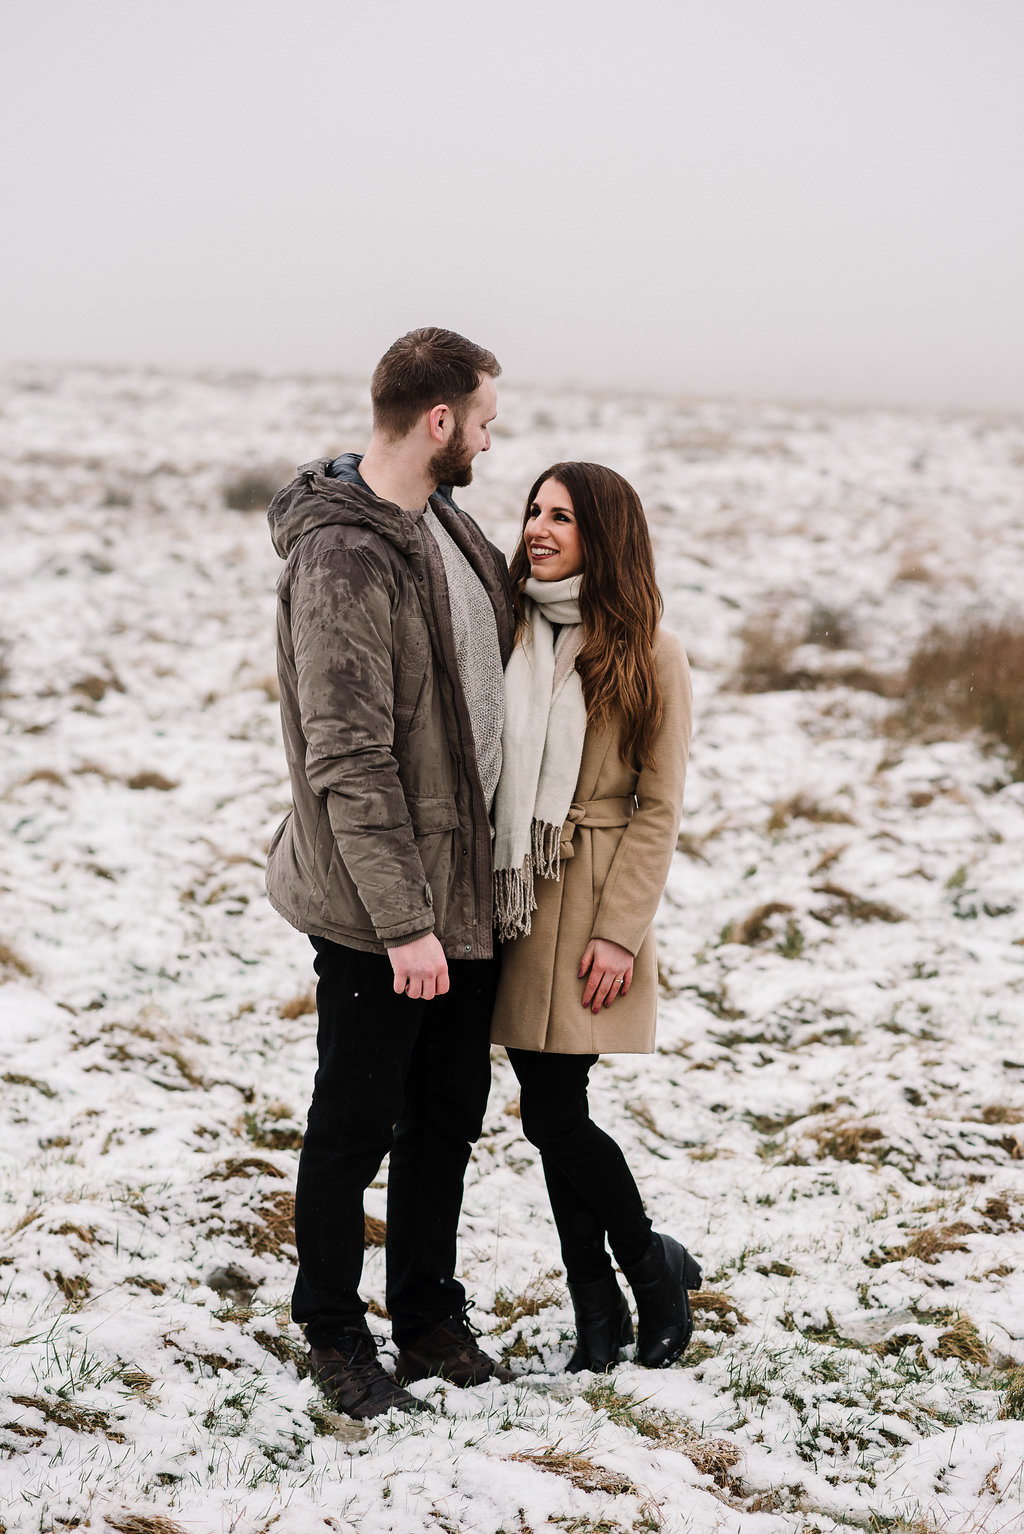 Relaxed shot of couple standing together in the snow